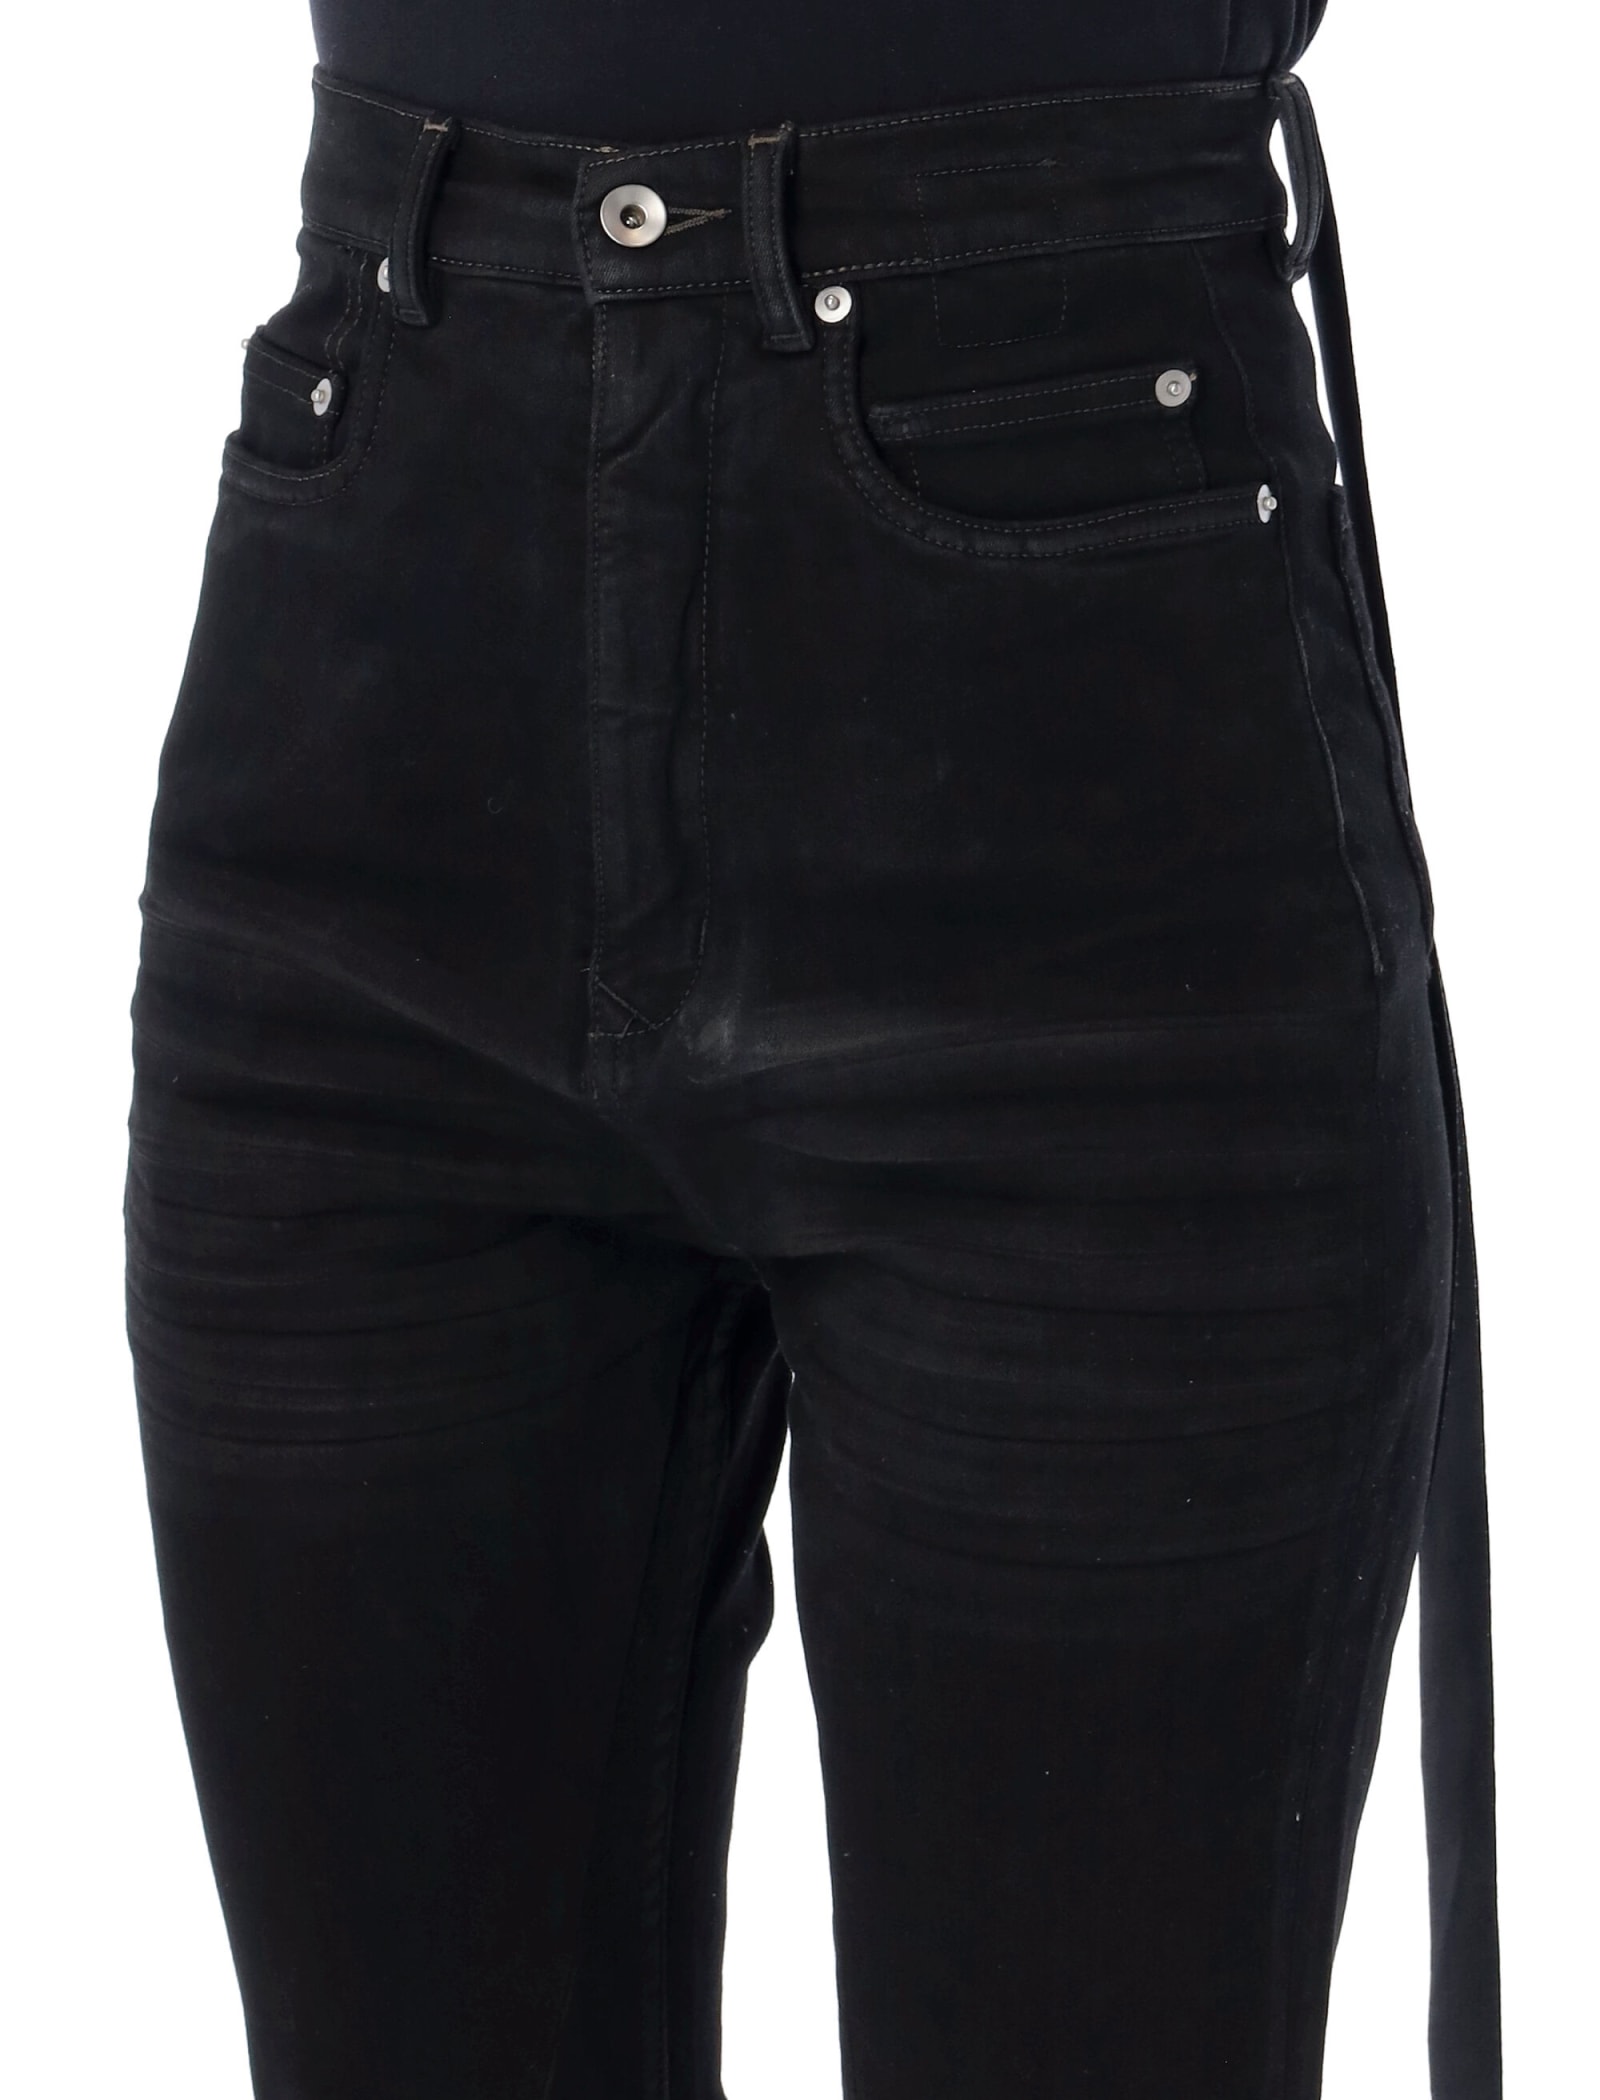 Shop Drkshdw Bolan Bootcup Jeans In Black